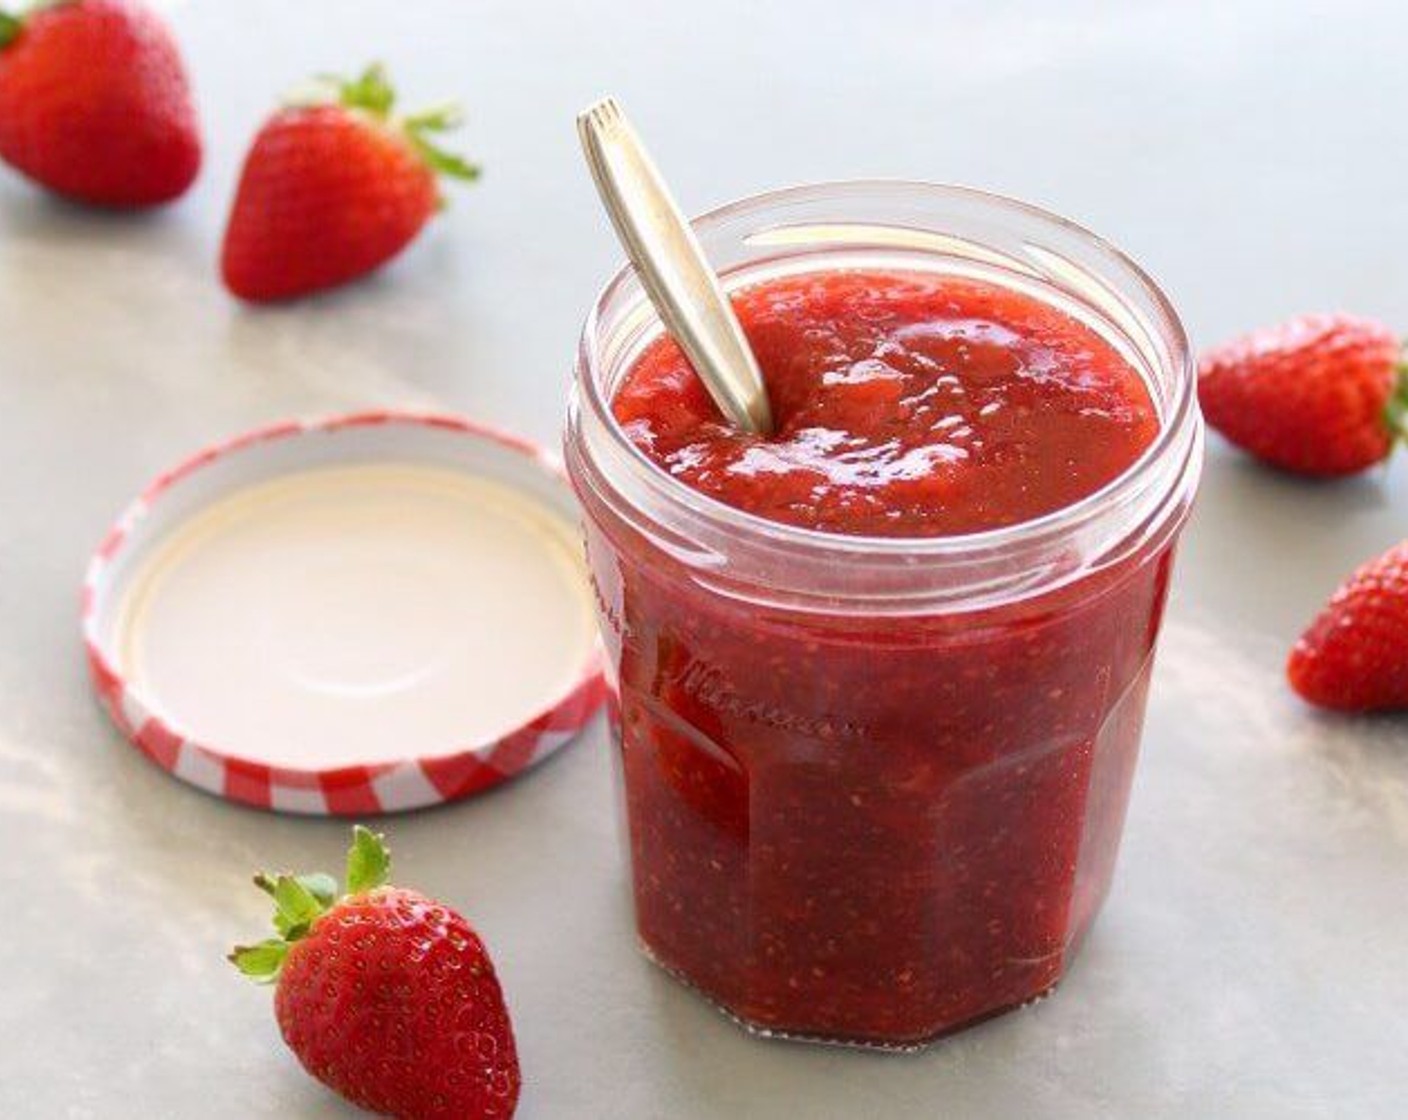 step 5 Pour the jam into glass jars with airtight lids. Store them in the fridge or freezer. Enjoy!